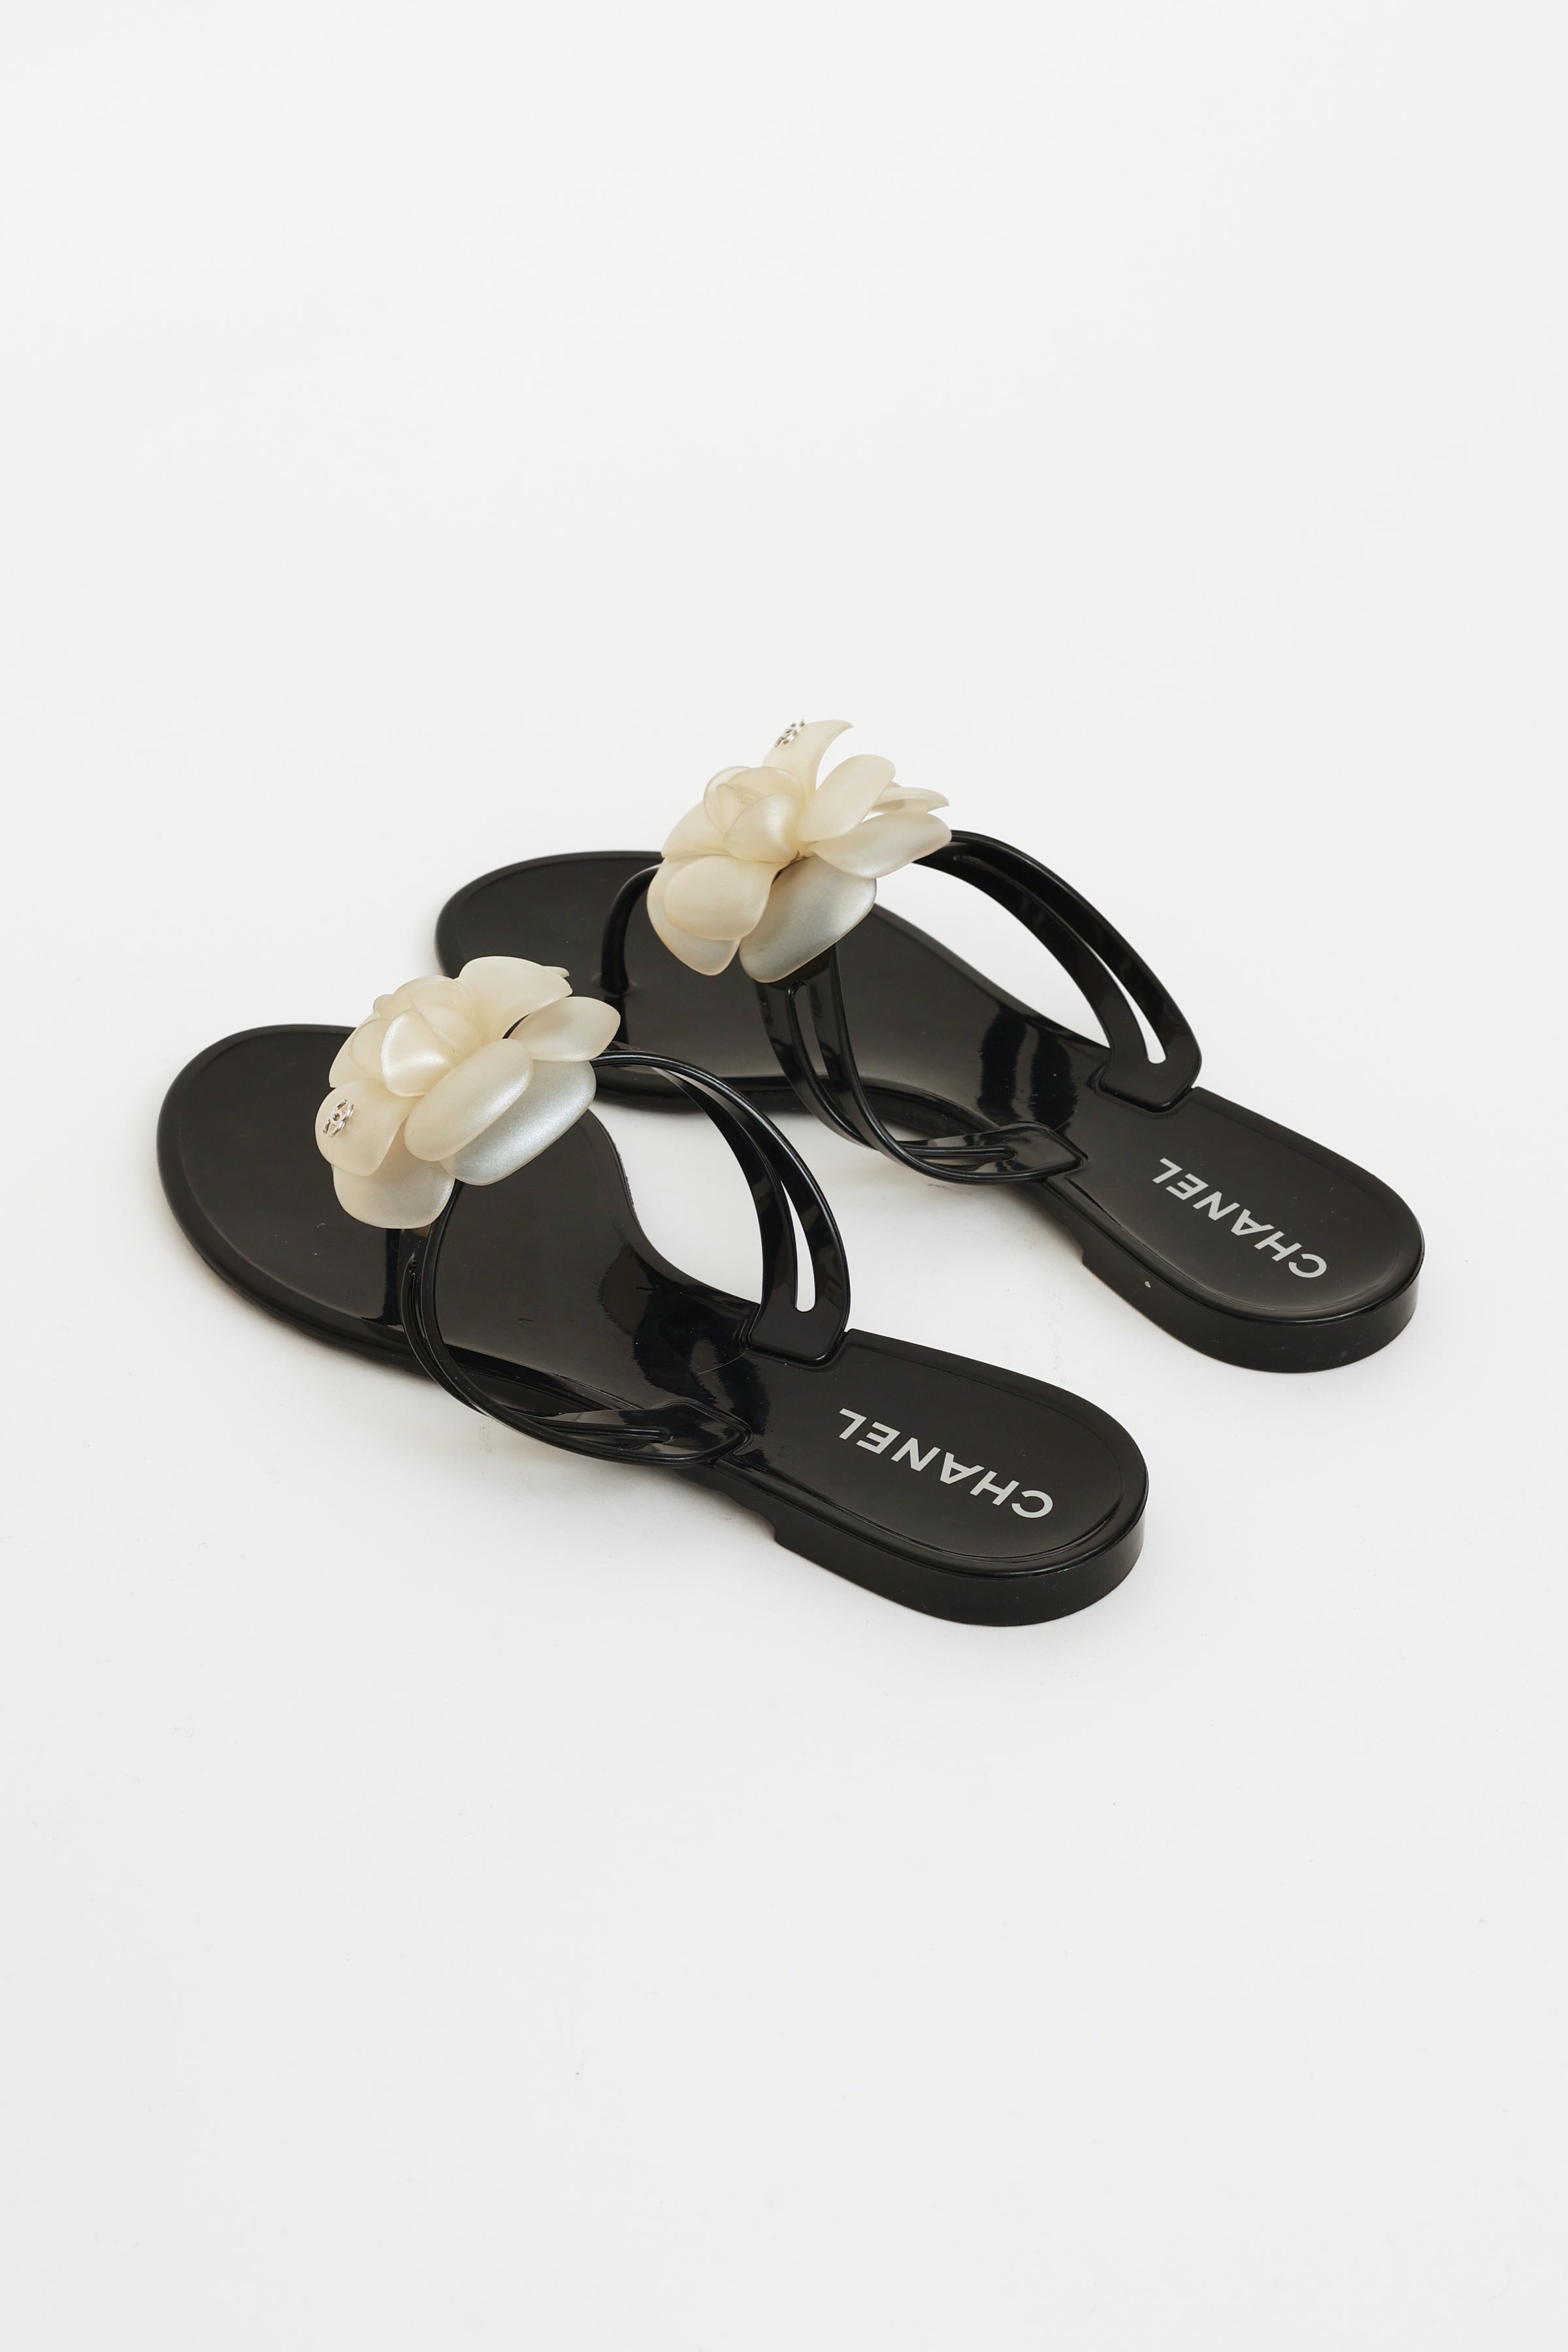 Chanel White and Black Camellia Flower Jelly Quilted Thong Sandals Size 38